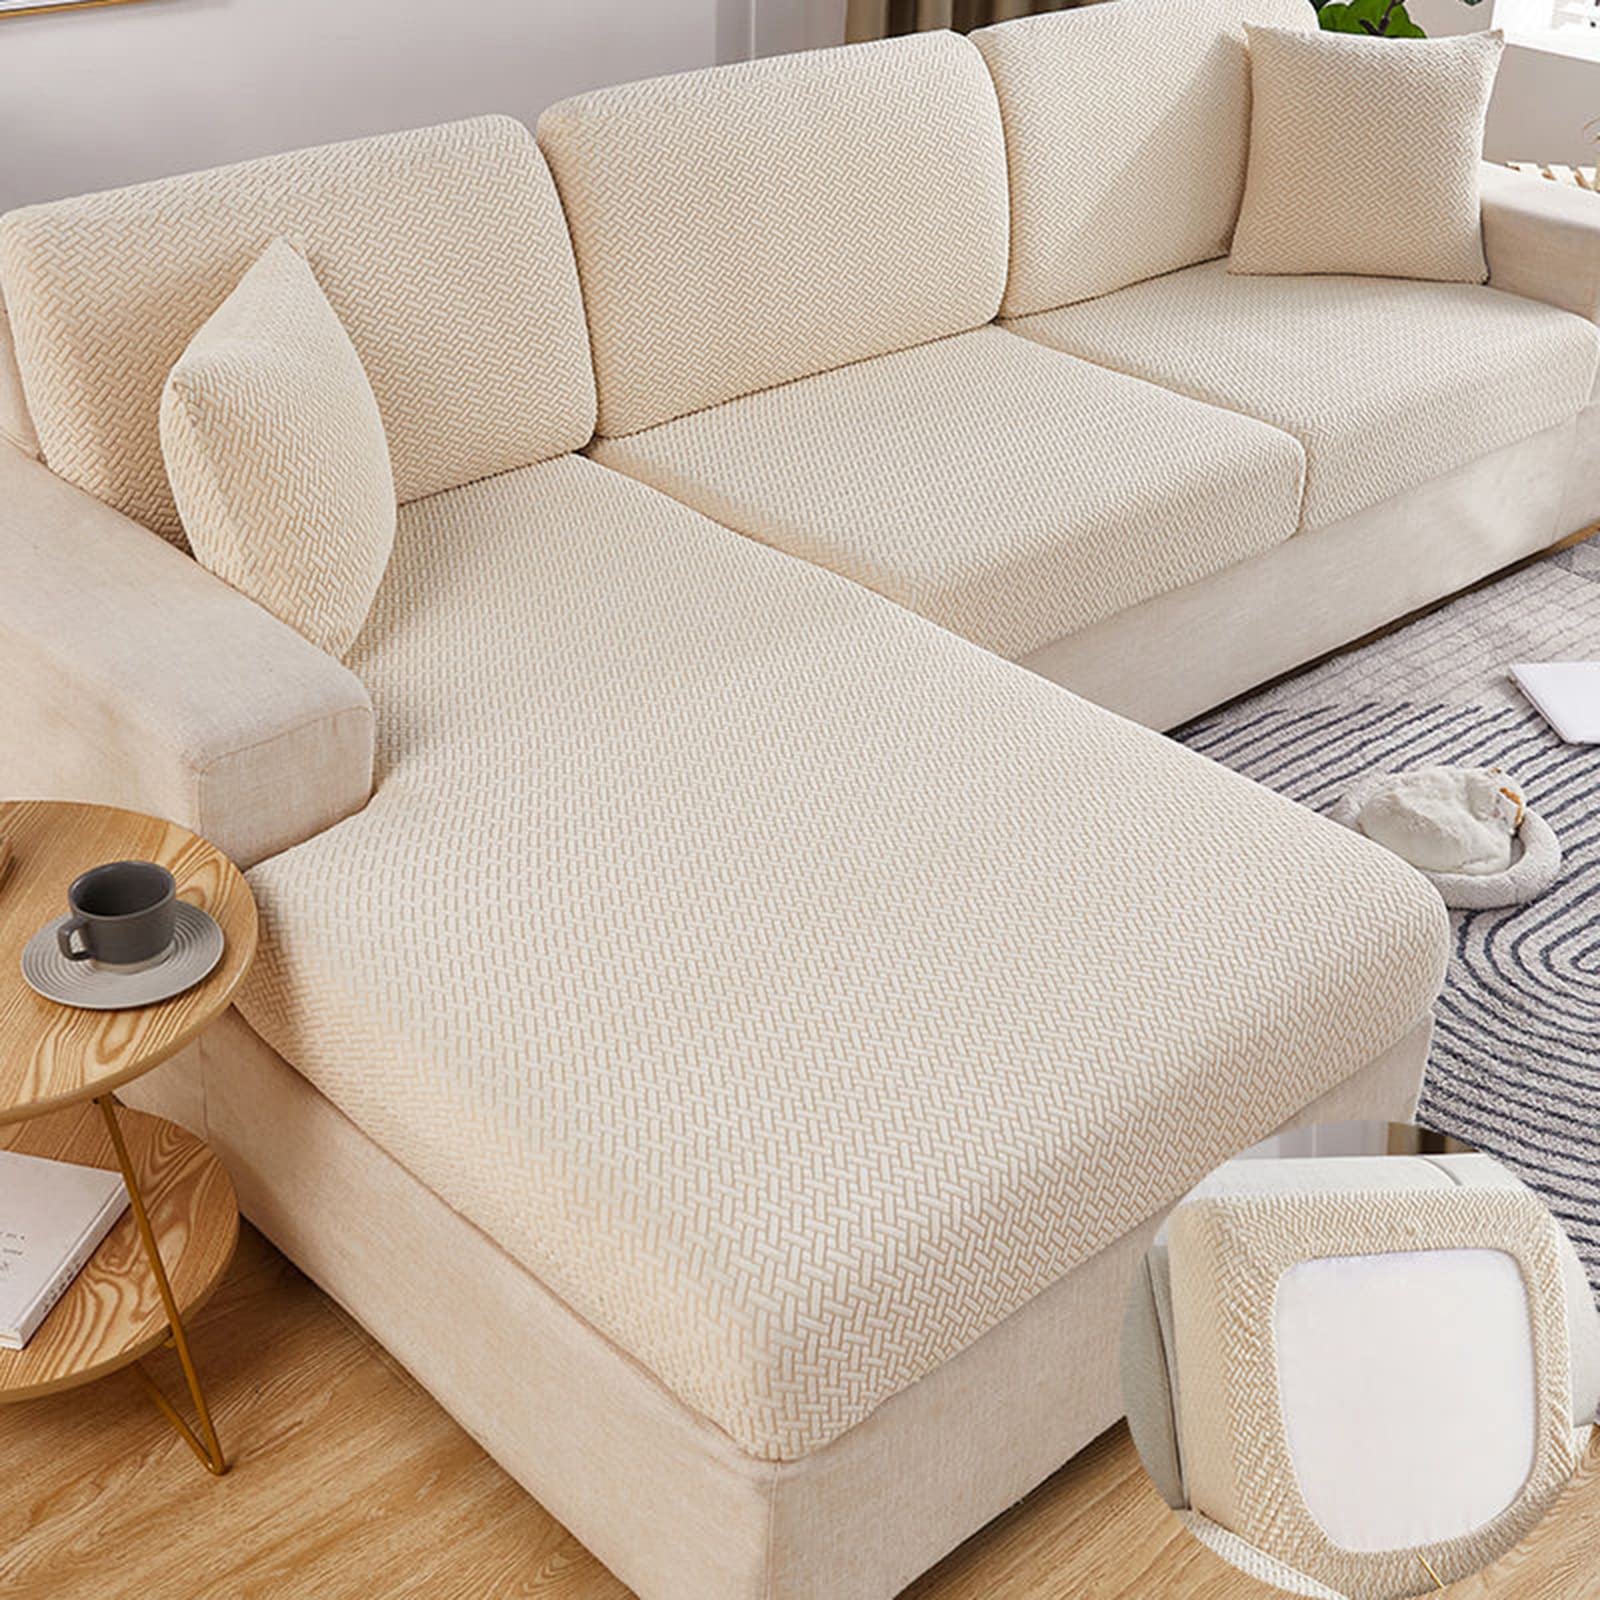 Soft & Protective Sofa Covers